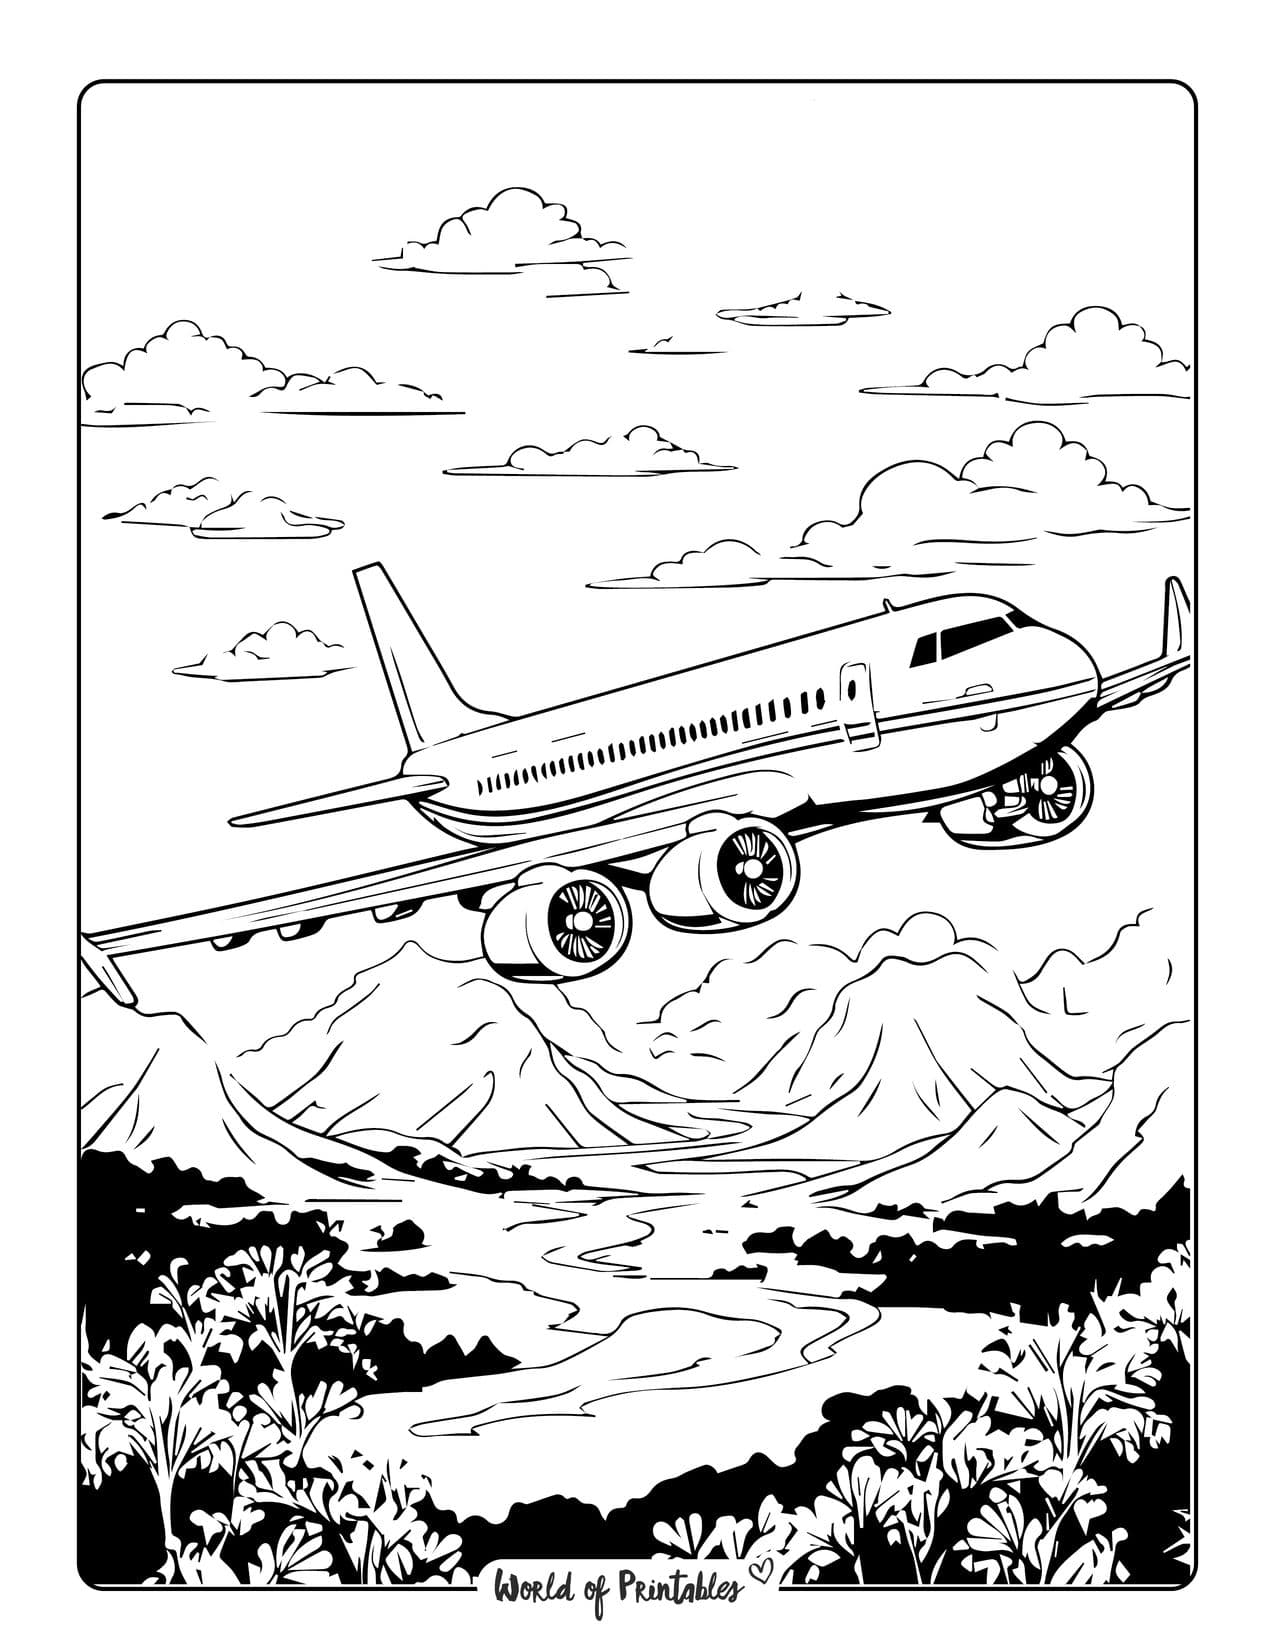 Airplane coloring pages for kids adults